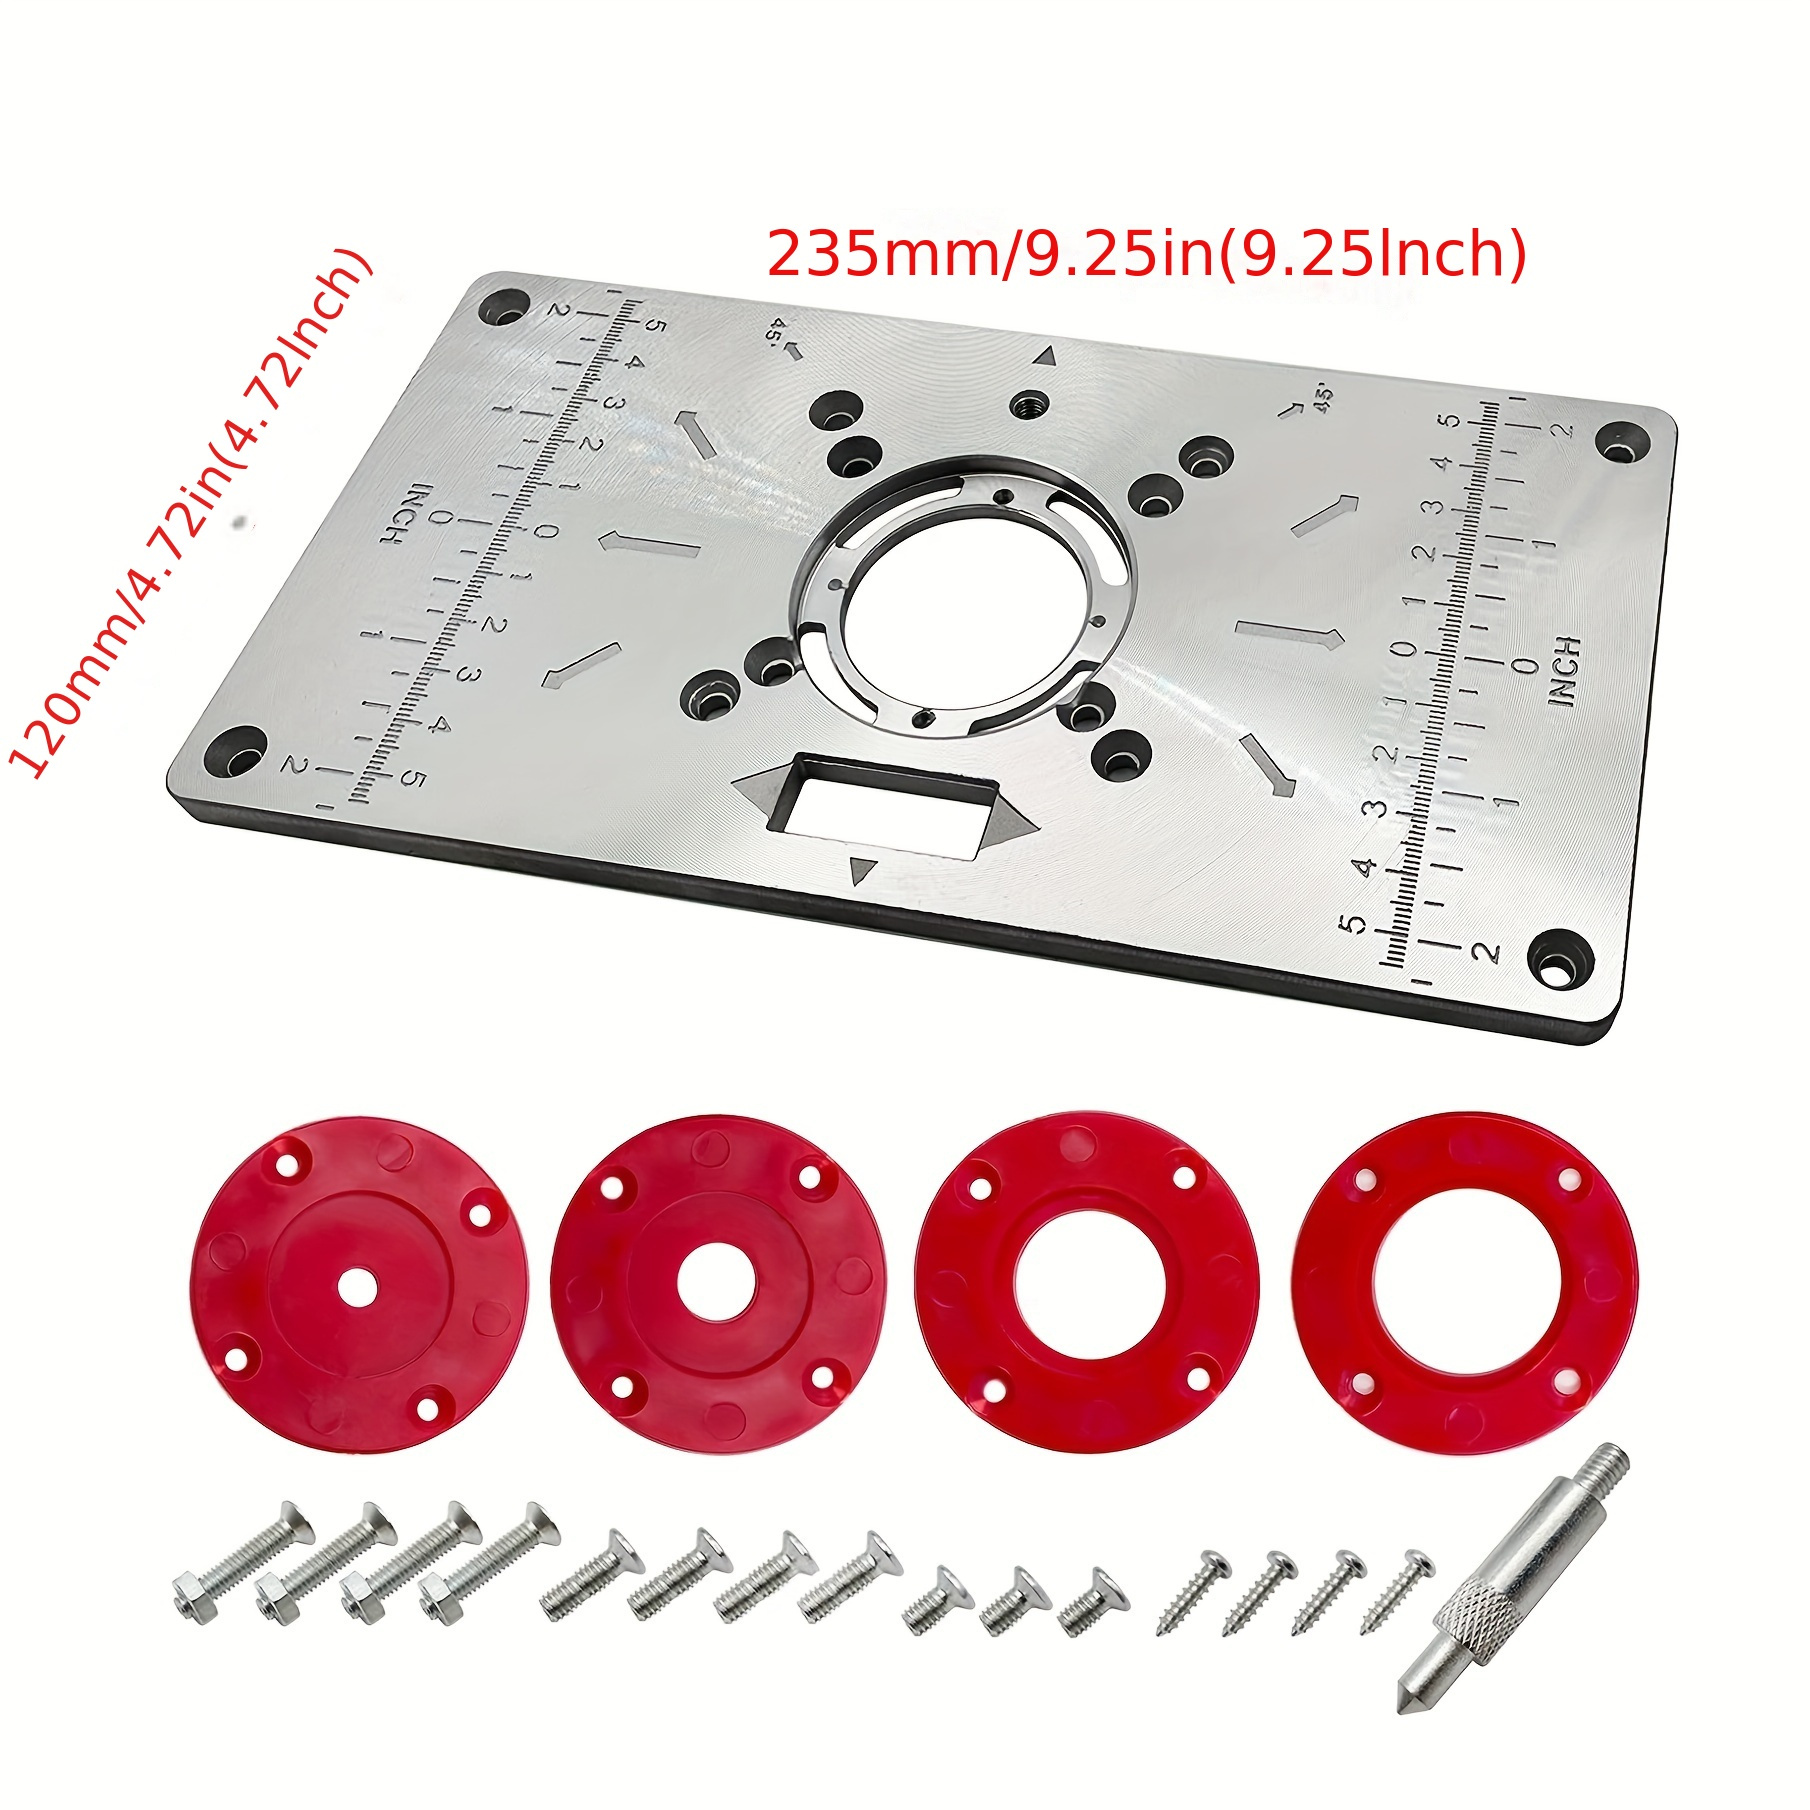 

Router Table Insert Plate Table, Aluminium Alloy Woodworking Benches Router Plate Wood Tools With 4 Rings And Table Saws For Multifunctional Wood Plate Machine Engraving